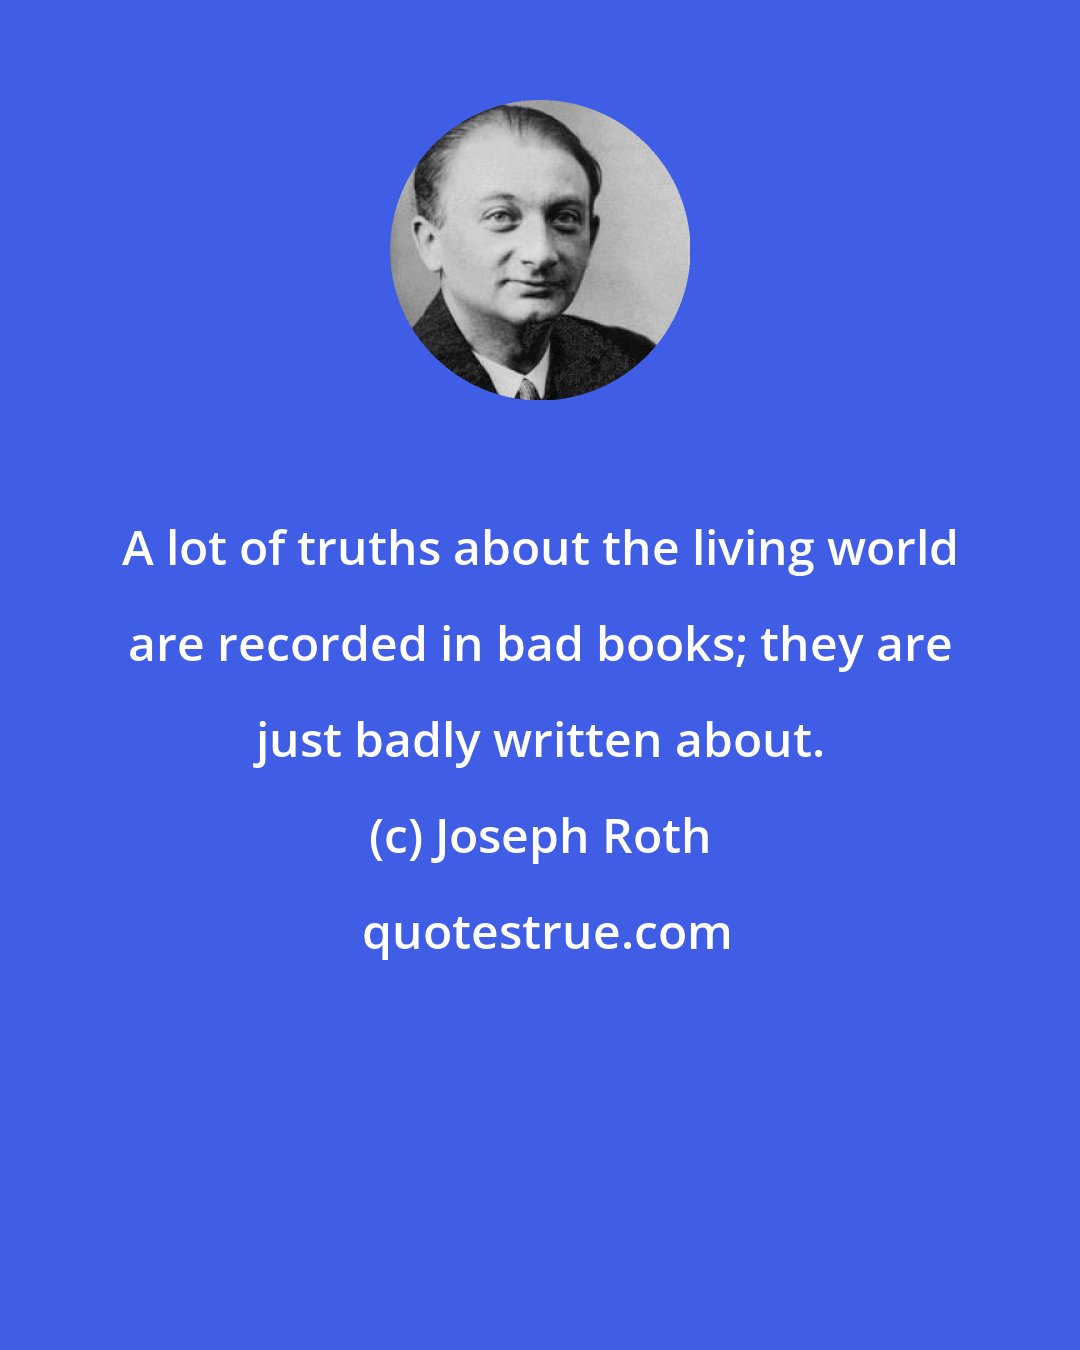 Joseph Roth: A lot of truths about the living world are recorded in bad books; they are just badly written about.